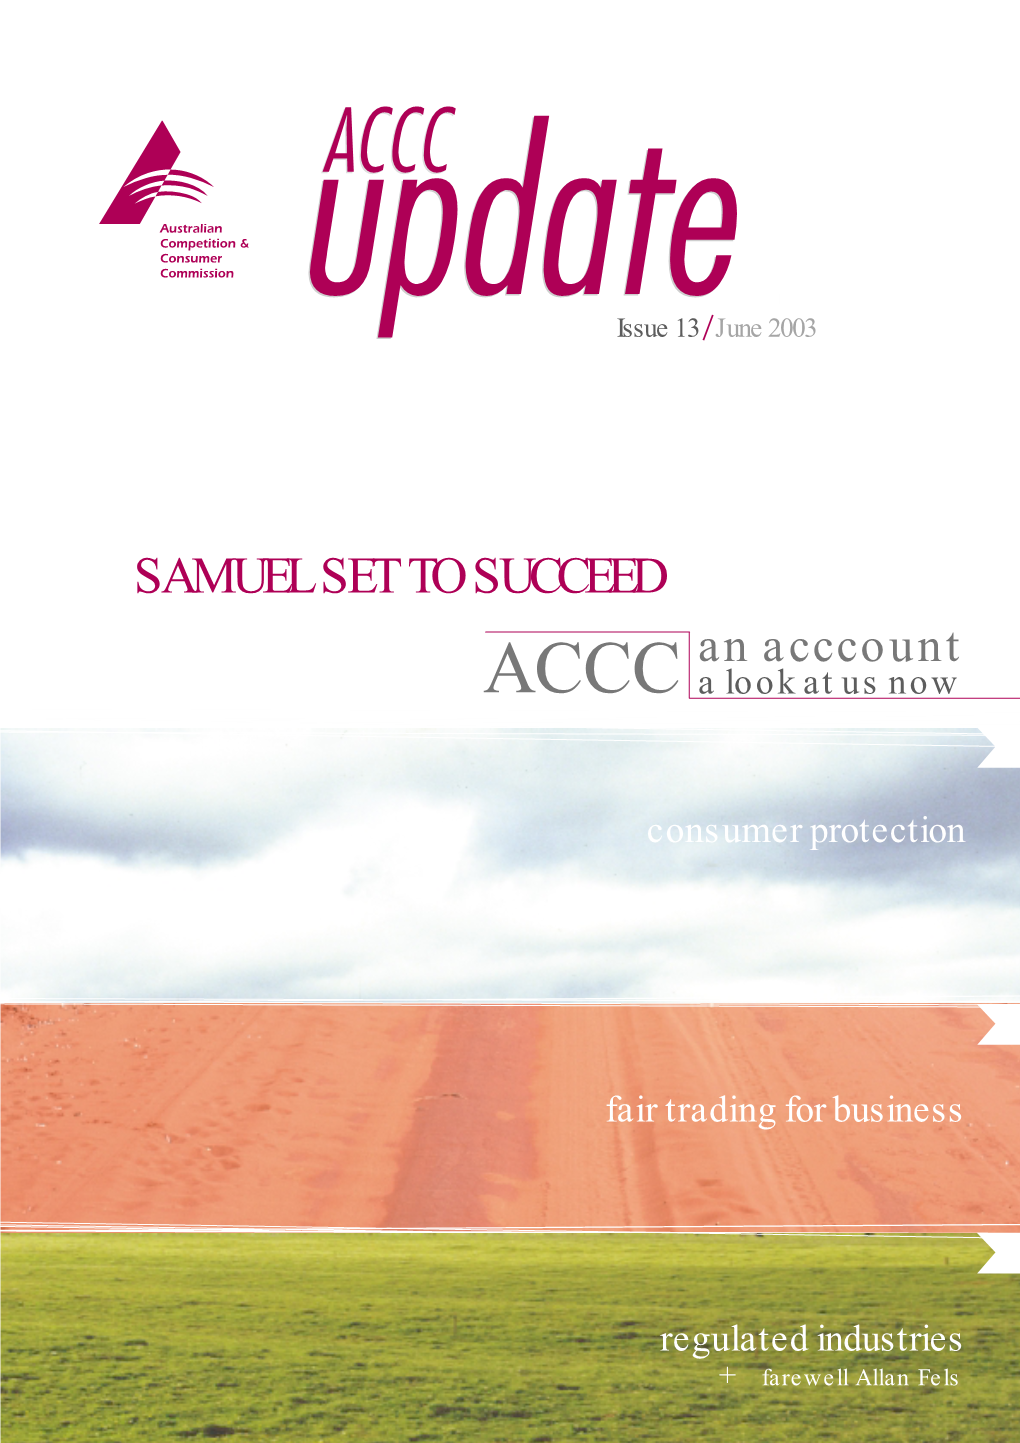 ACCC Update Issue 13